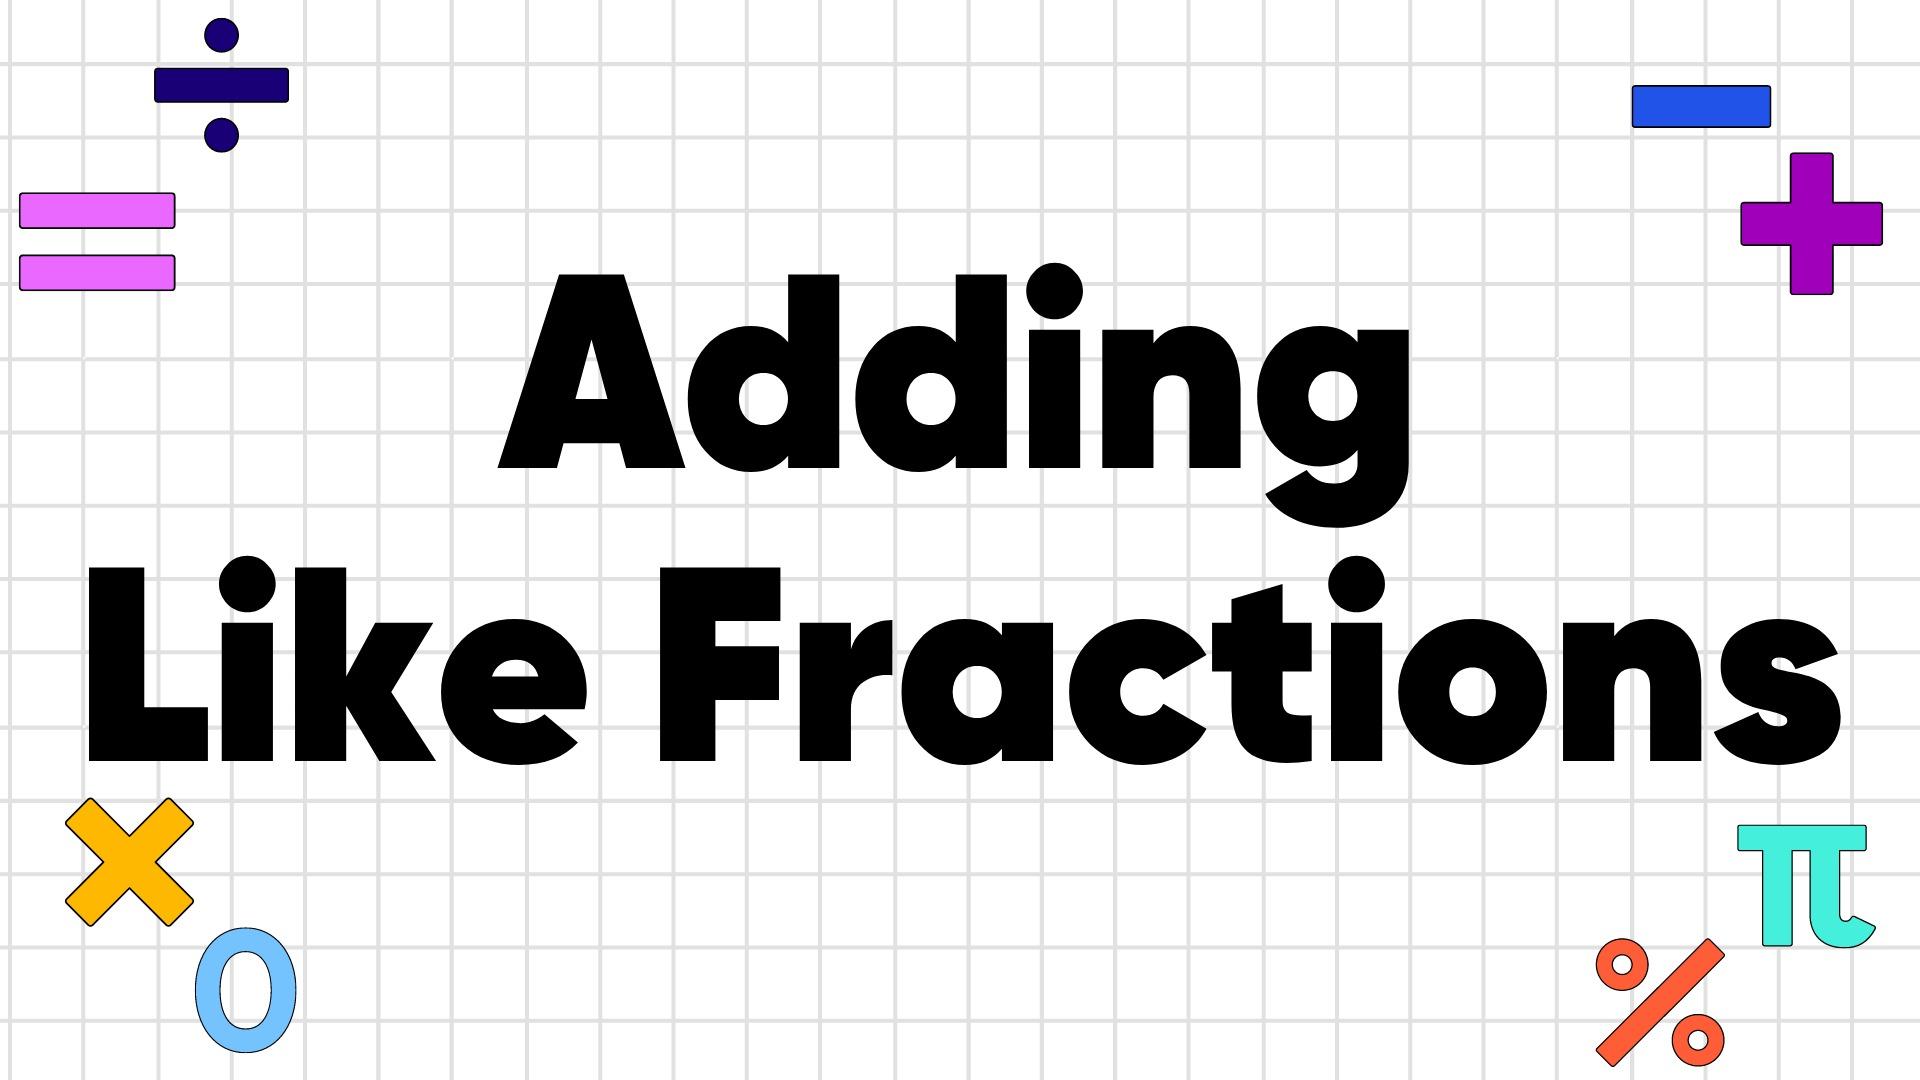 How To Add Like Fractions - Creating Improper Fractions